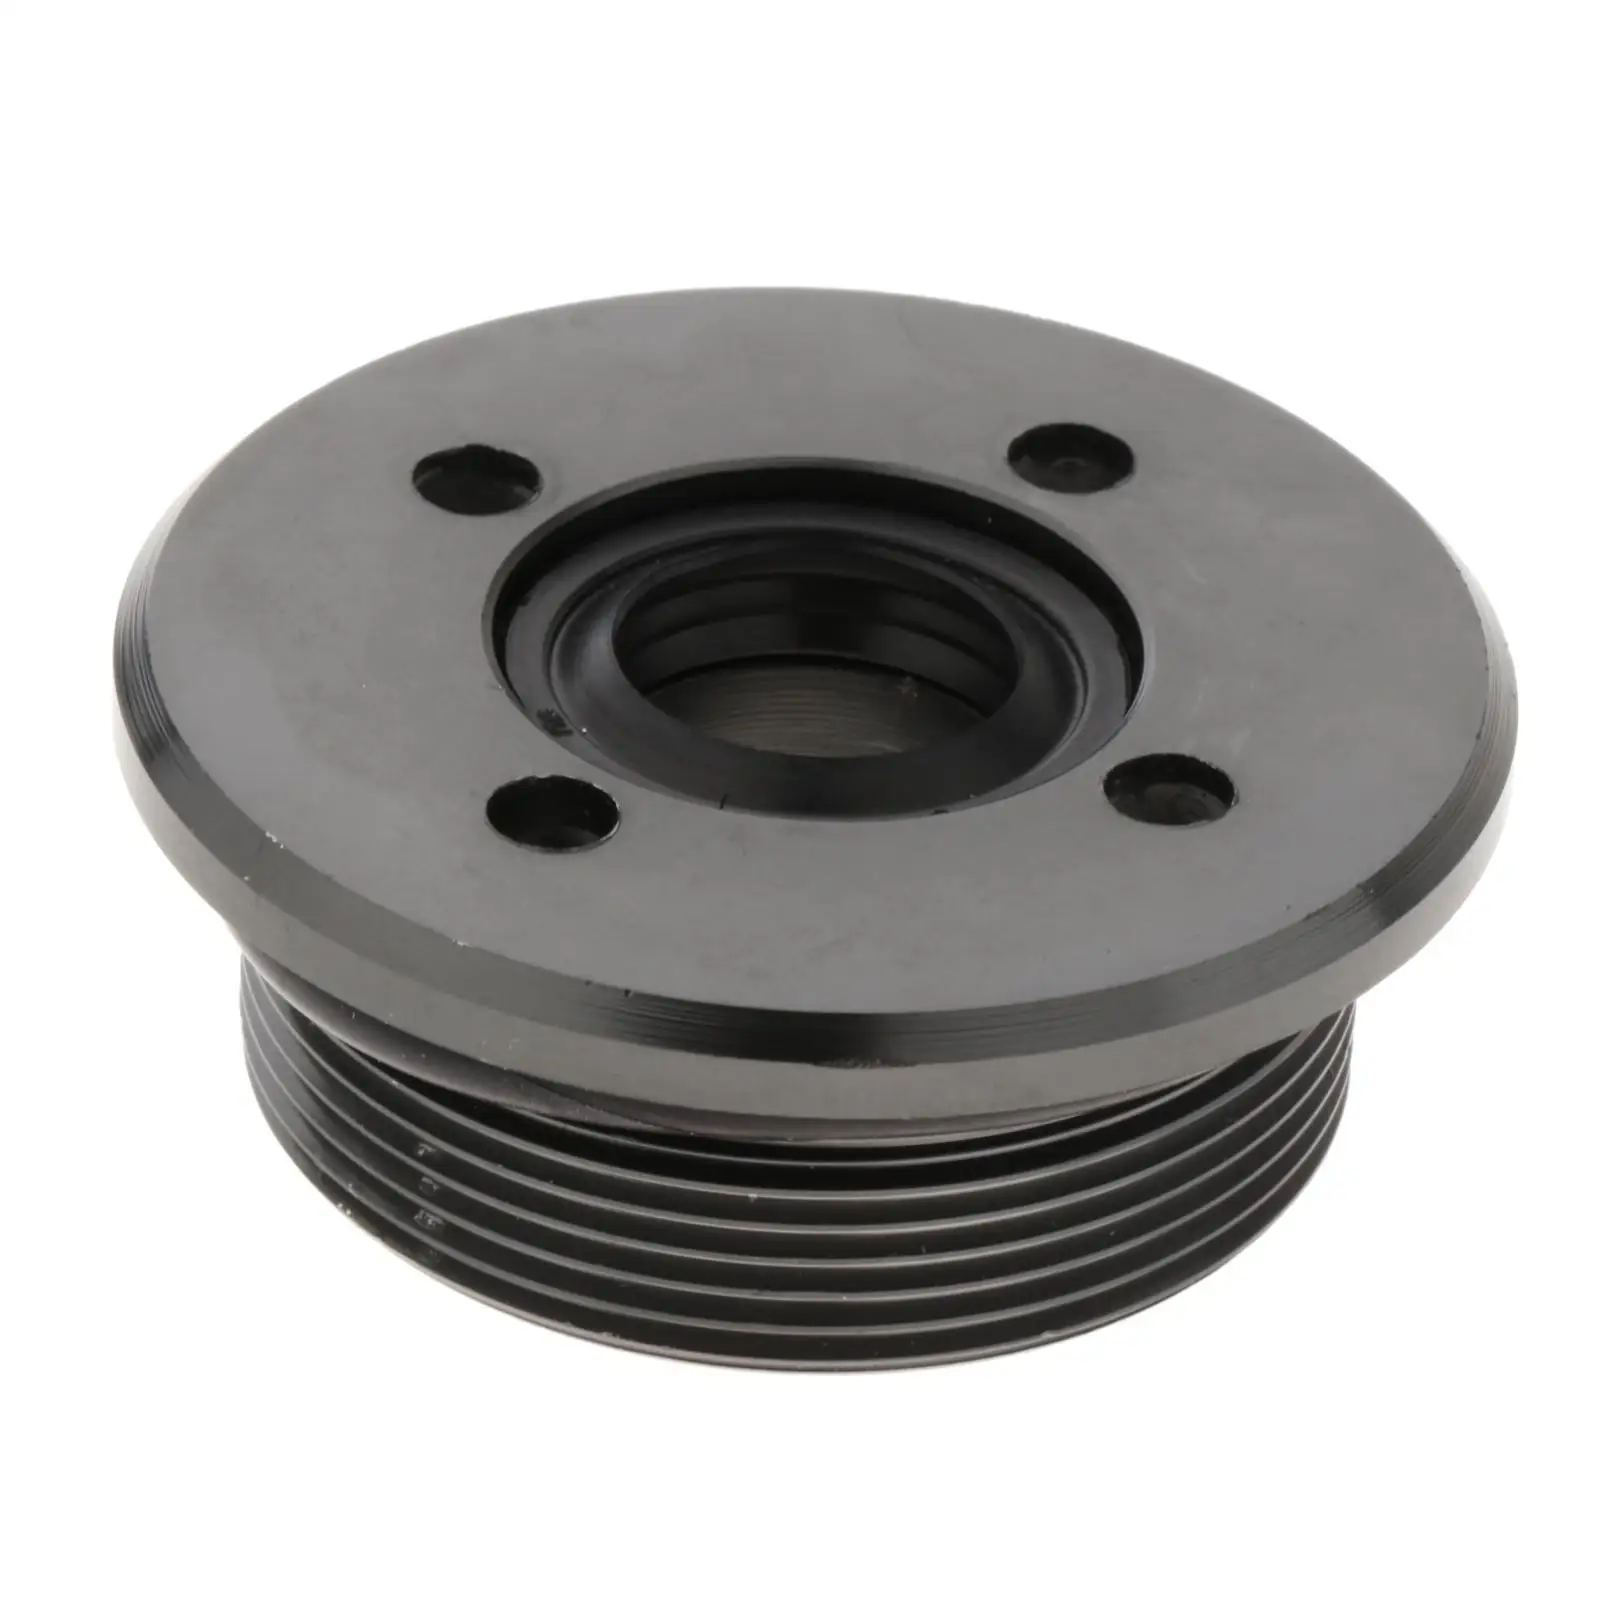 6H1-43821 End Cover with Seals 6H1-43821-11 for Yamaha Outboard Motor 60 70 75 85 90HP Replaces Metal High Performance